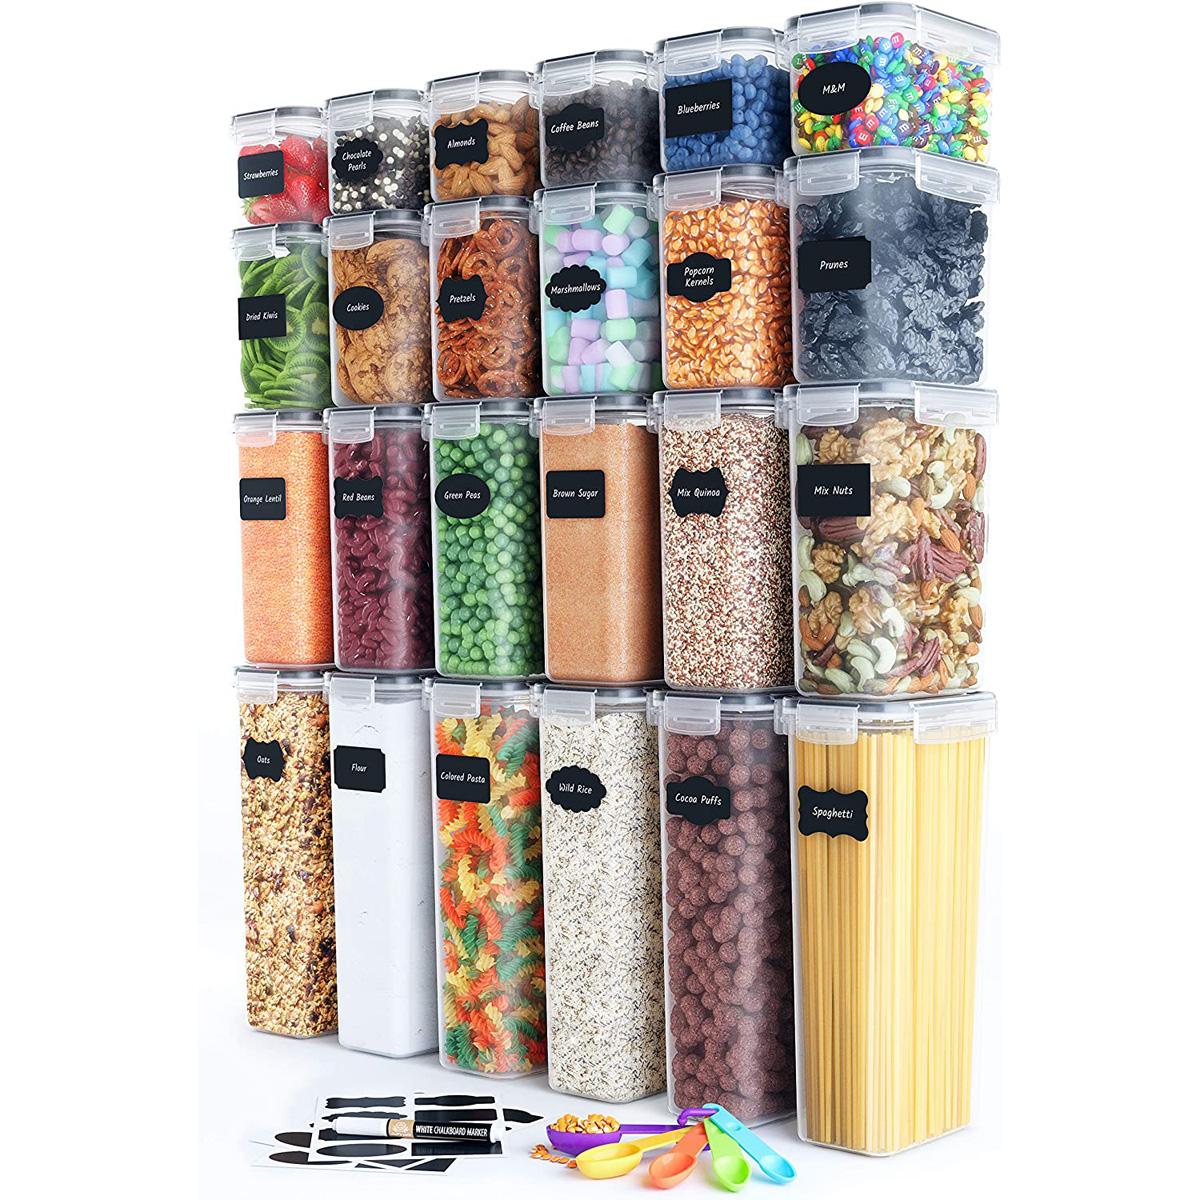 24 Airtight Food Storage Containers Set with Lids for $48.99 Shipped